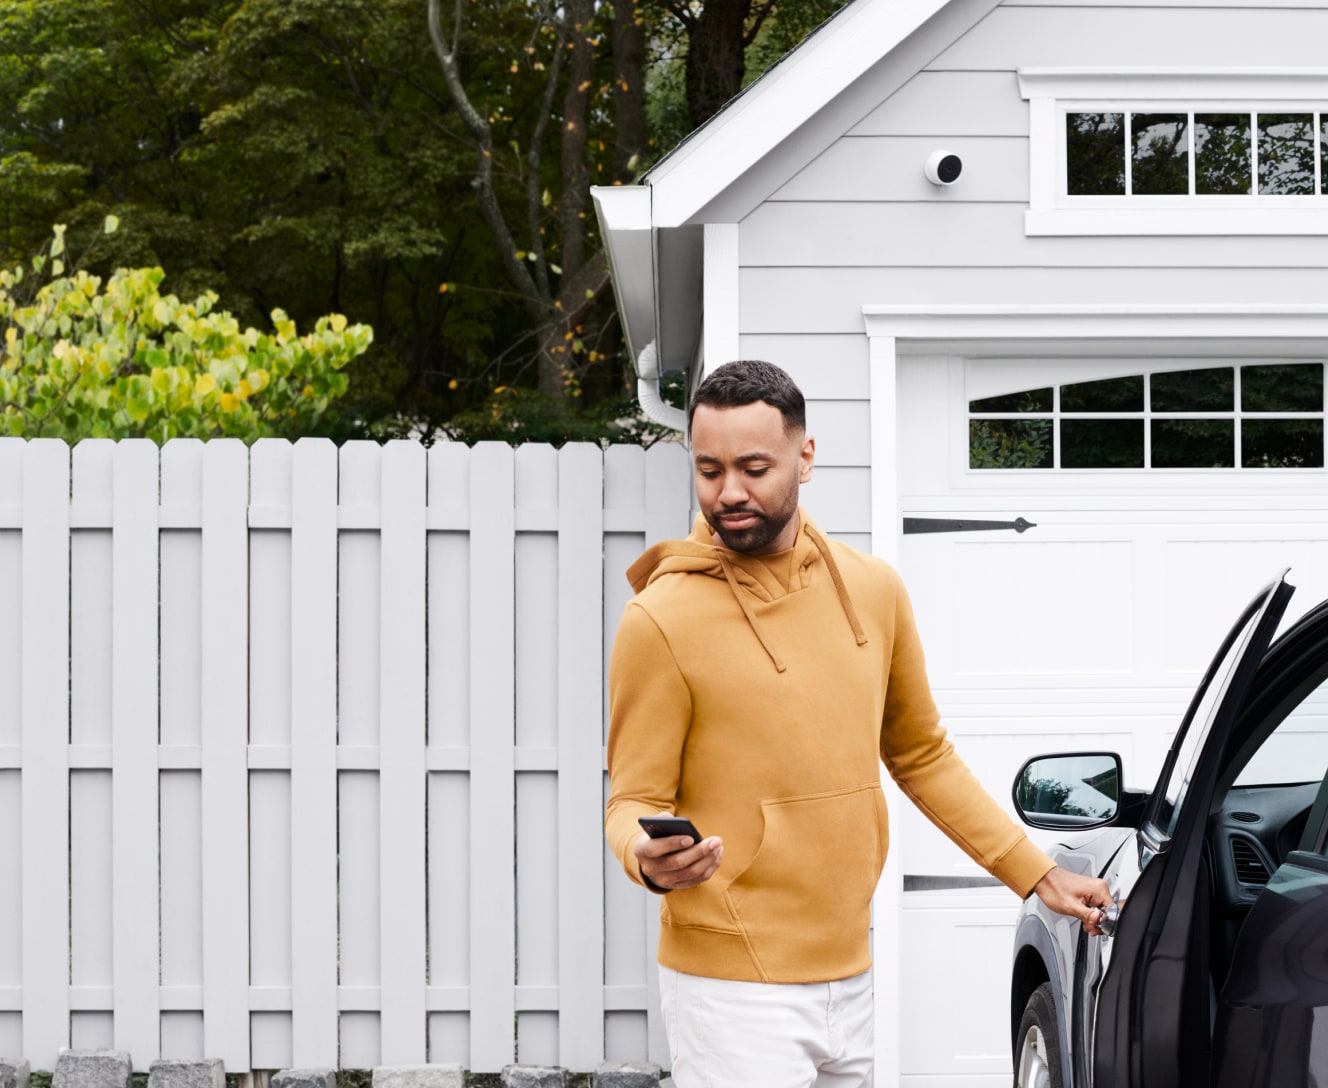 Man in driveway using his phone to check ADT survelliance on the ADT app